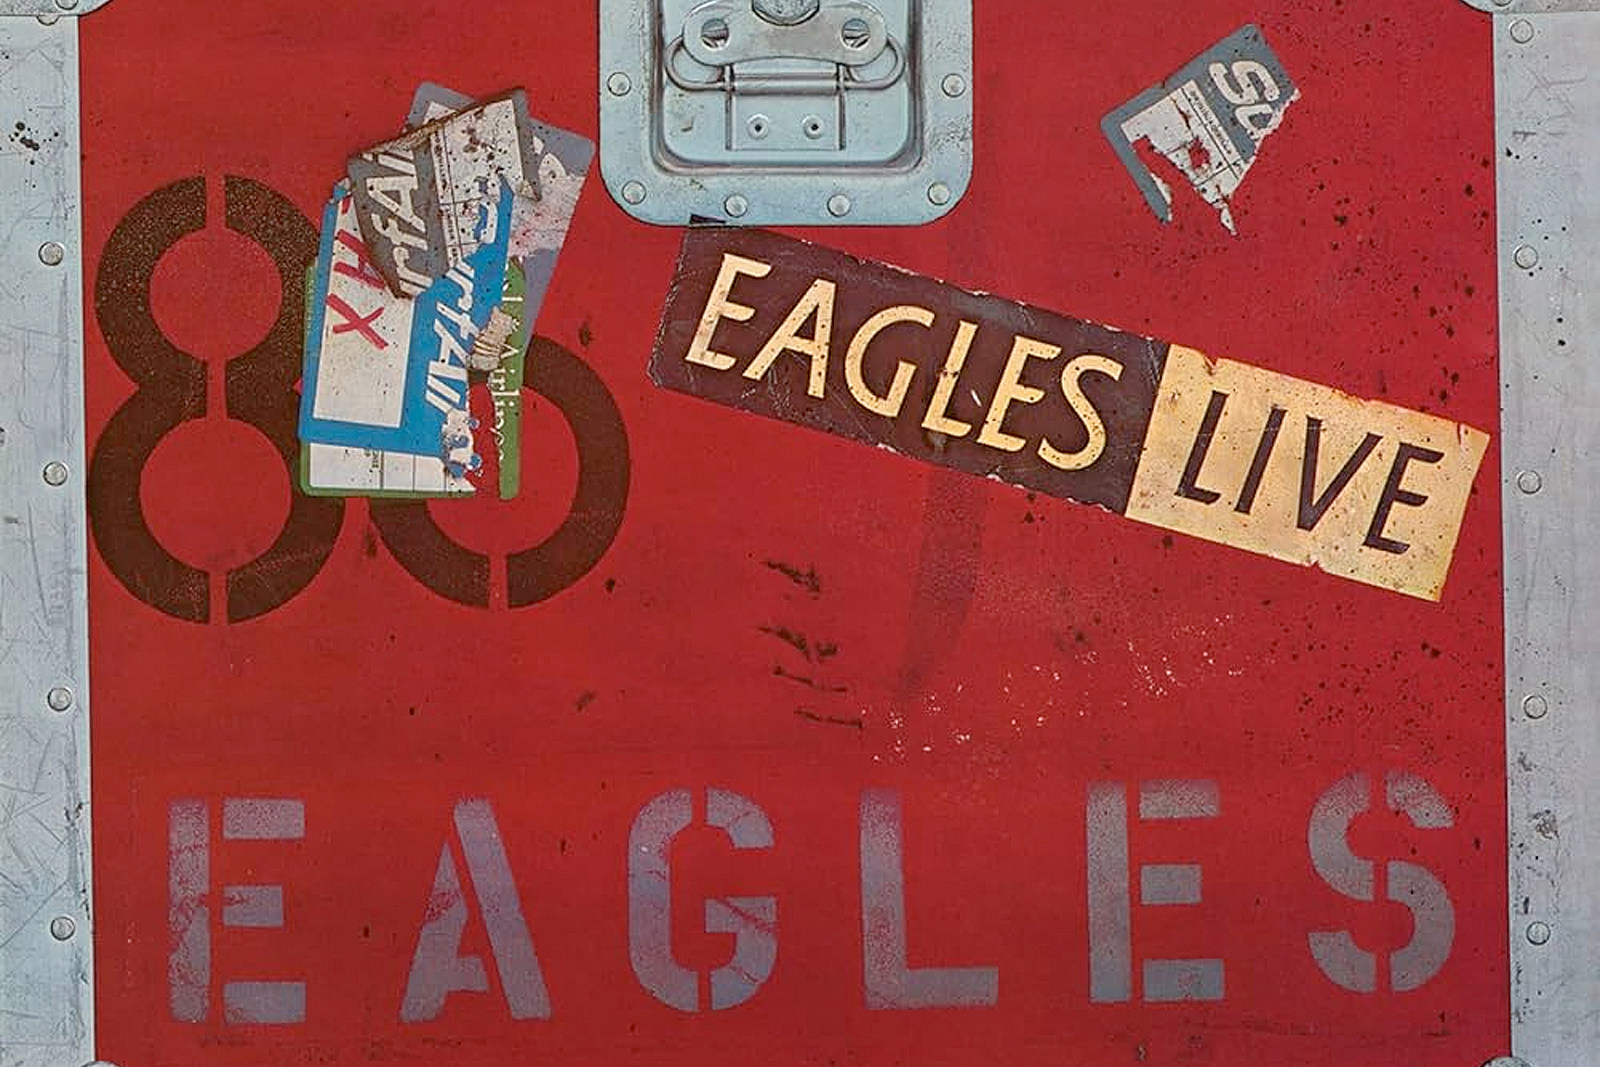 Top 10 Underrated Eagles Songs